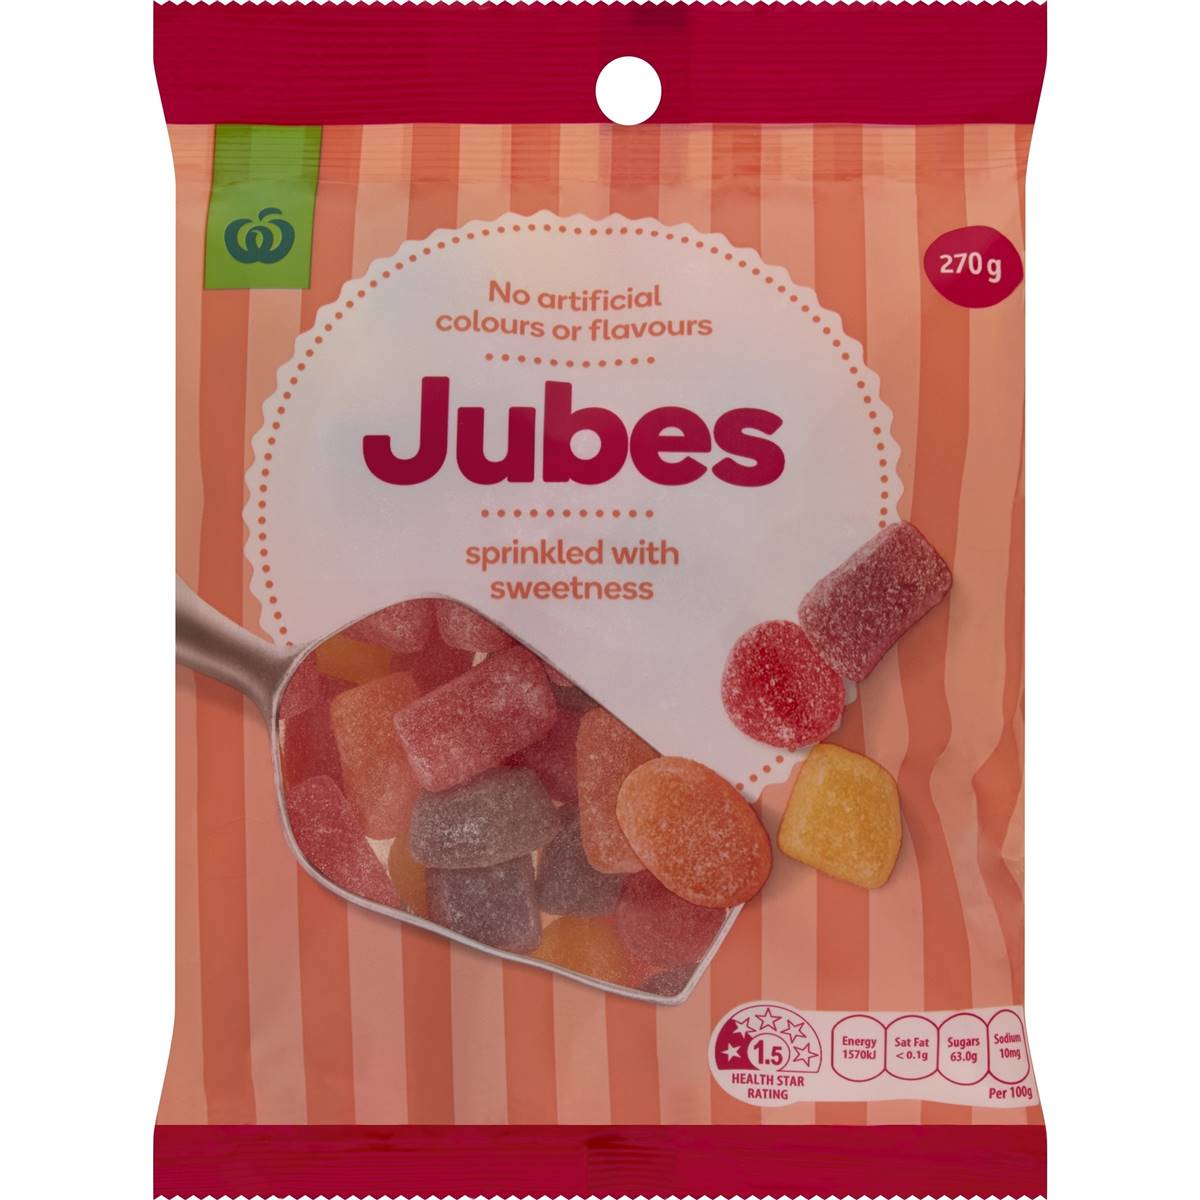 Calories in Woolworths Jubes